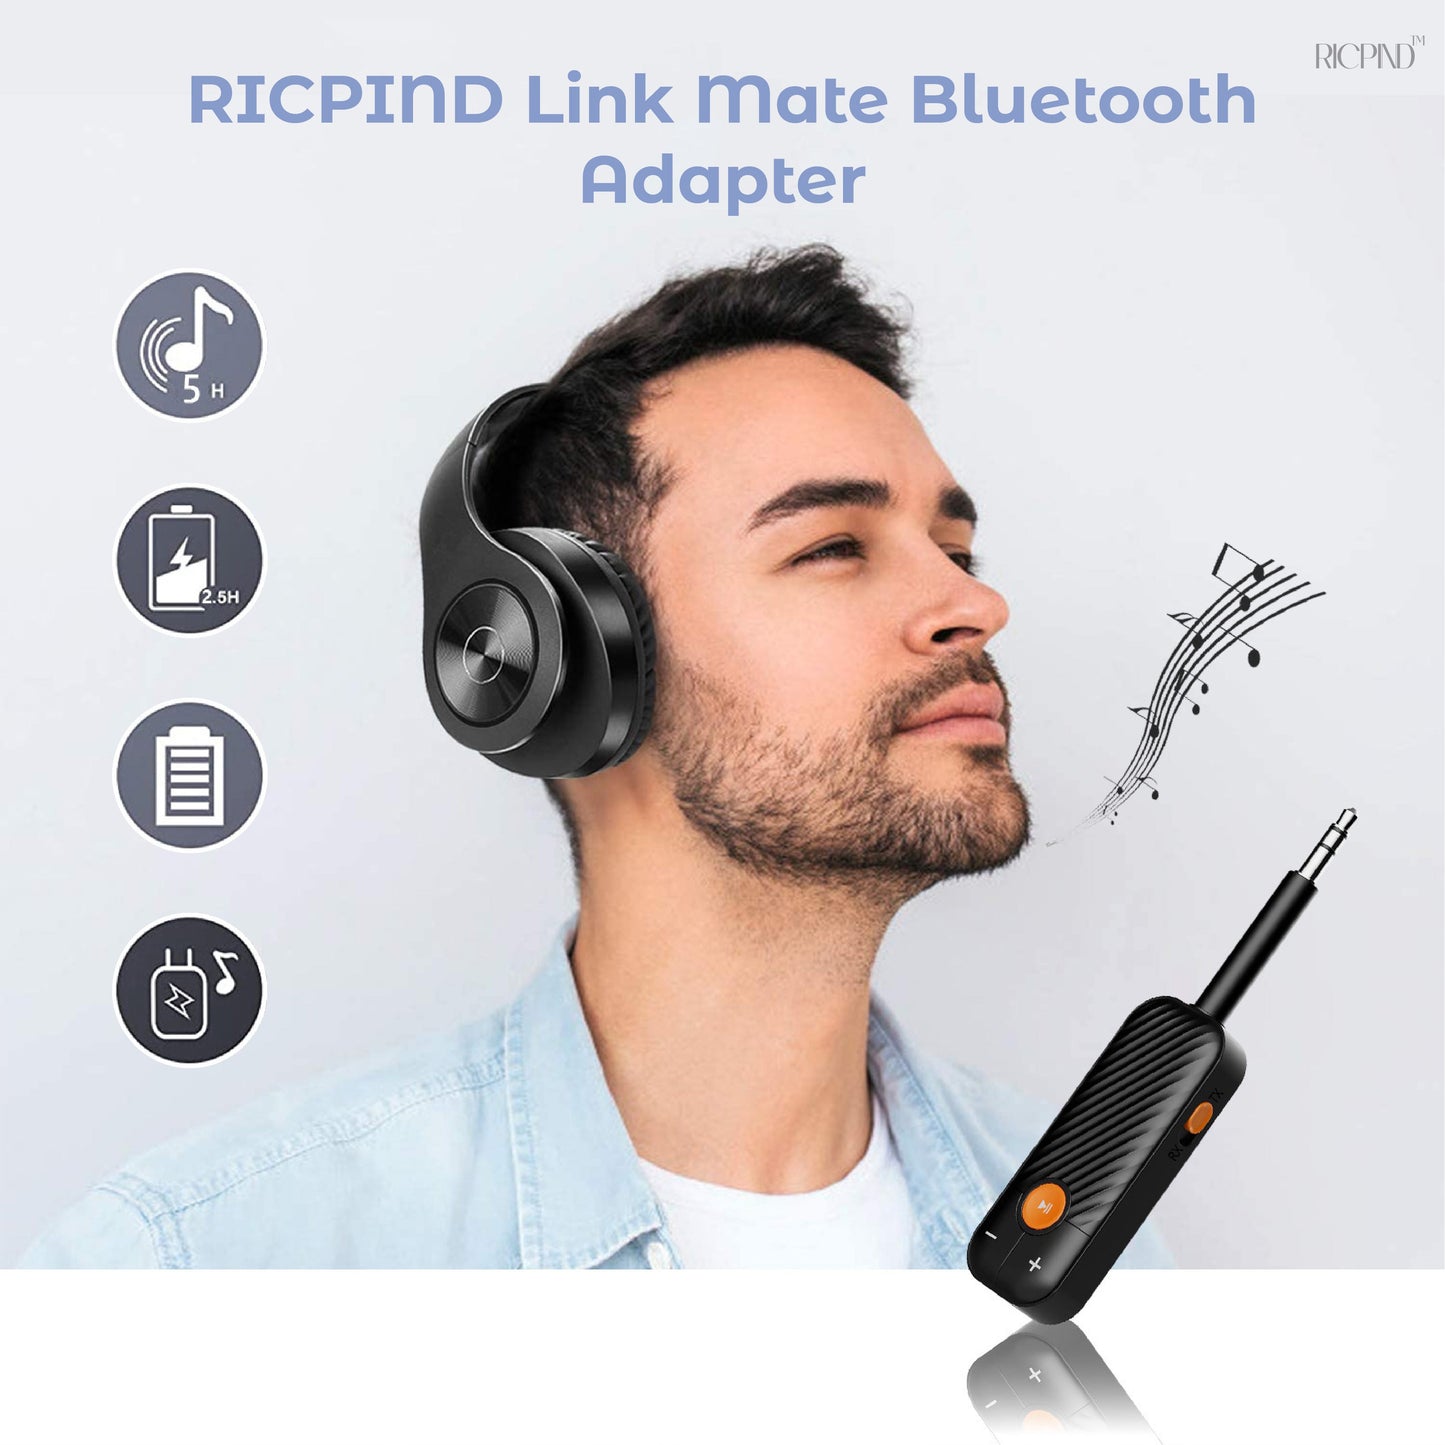 RICPIND Link Mate Bluetooth Adapter